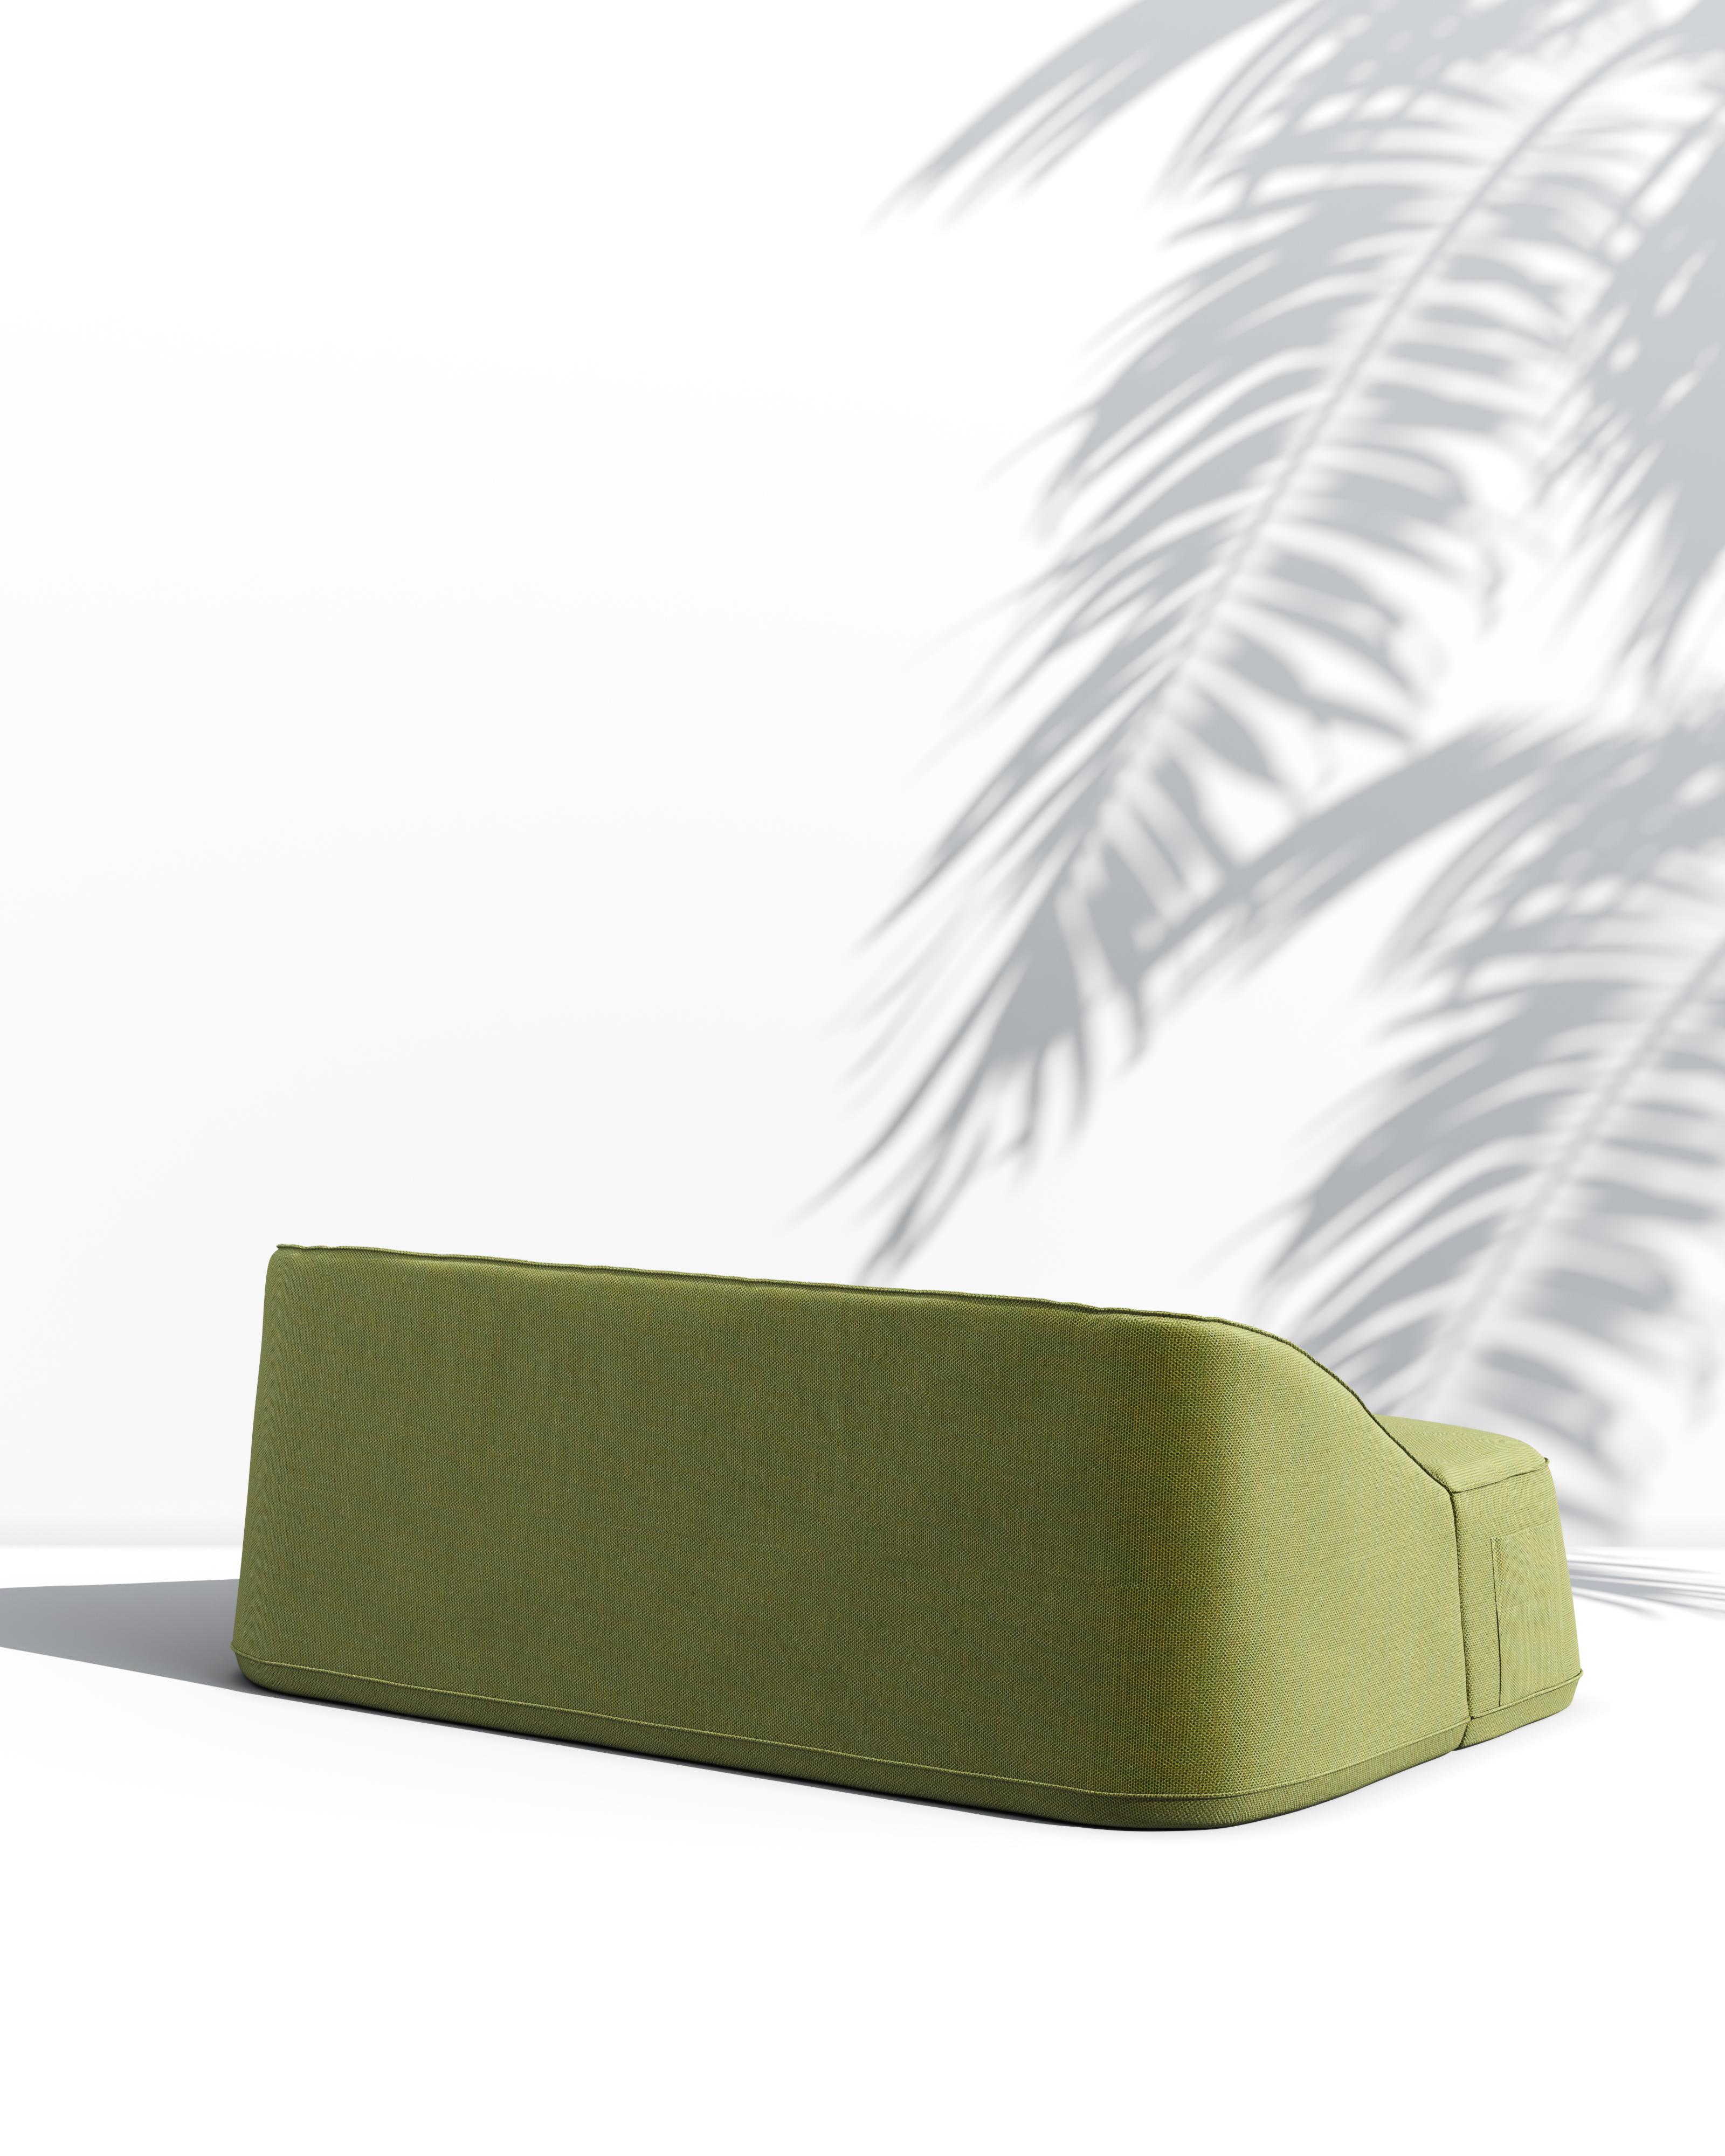 Contemporary Green Outdoor Sofa with Upholstery in Weather-Resistant Sunbrella Fabric For Sale